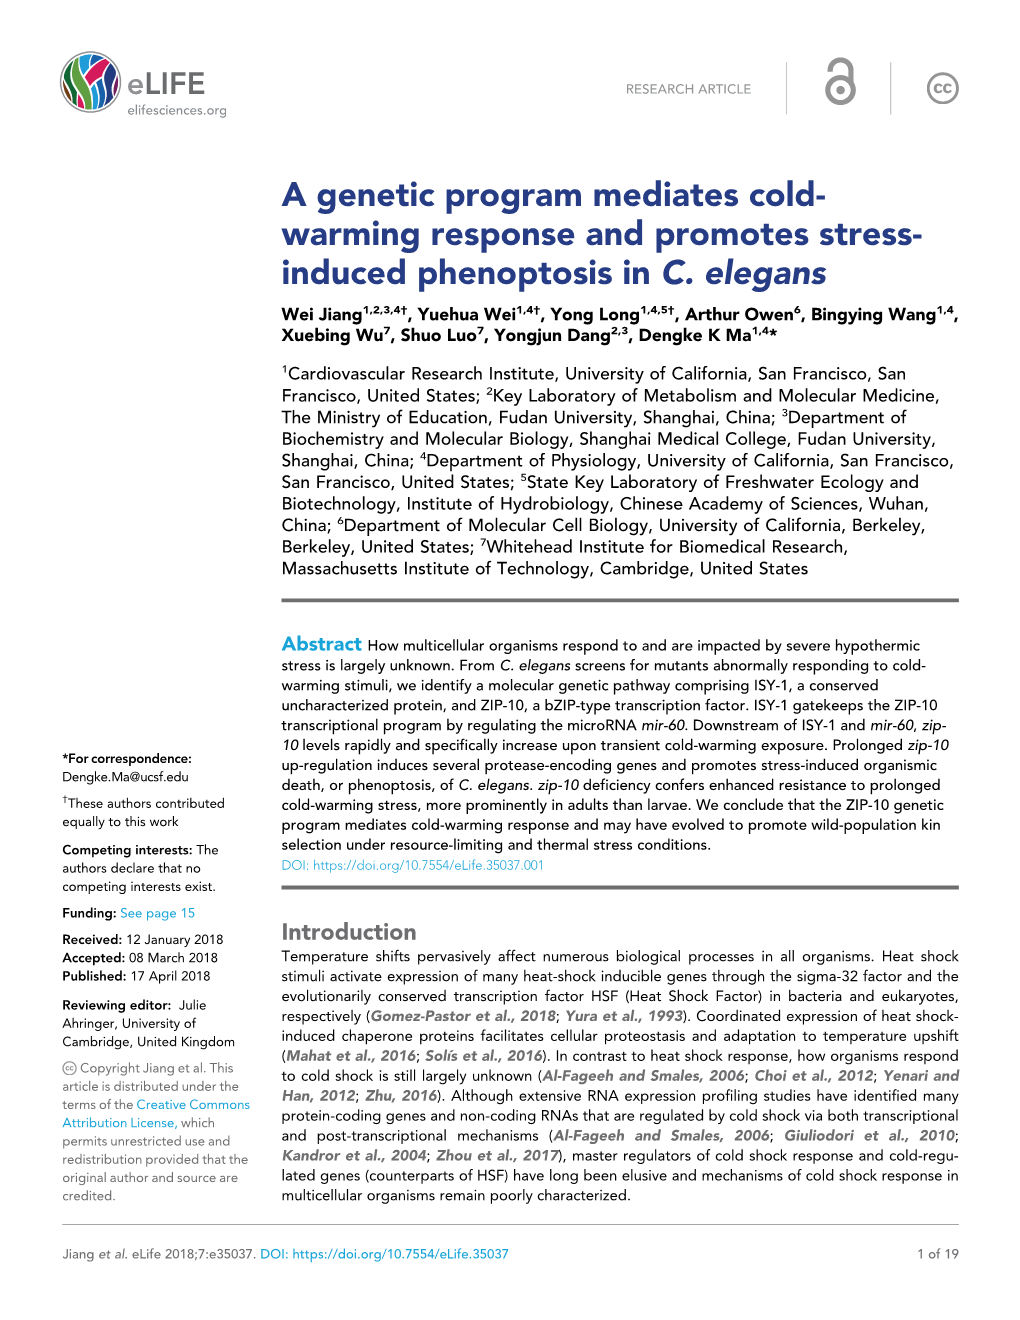 A Genetic Program Mediates Cold- Warming Response and Promotes Stress- Induced Phenoptosis in C